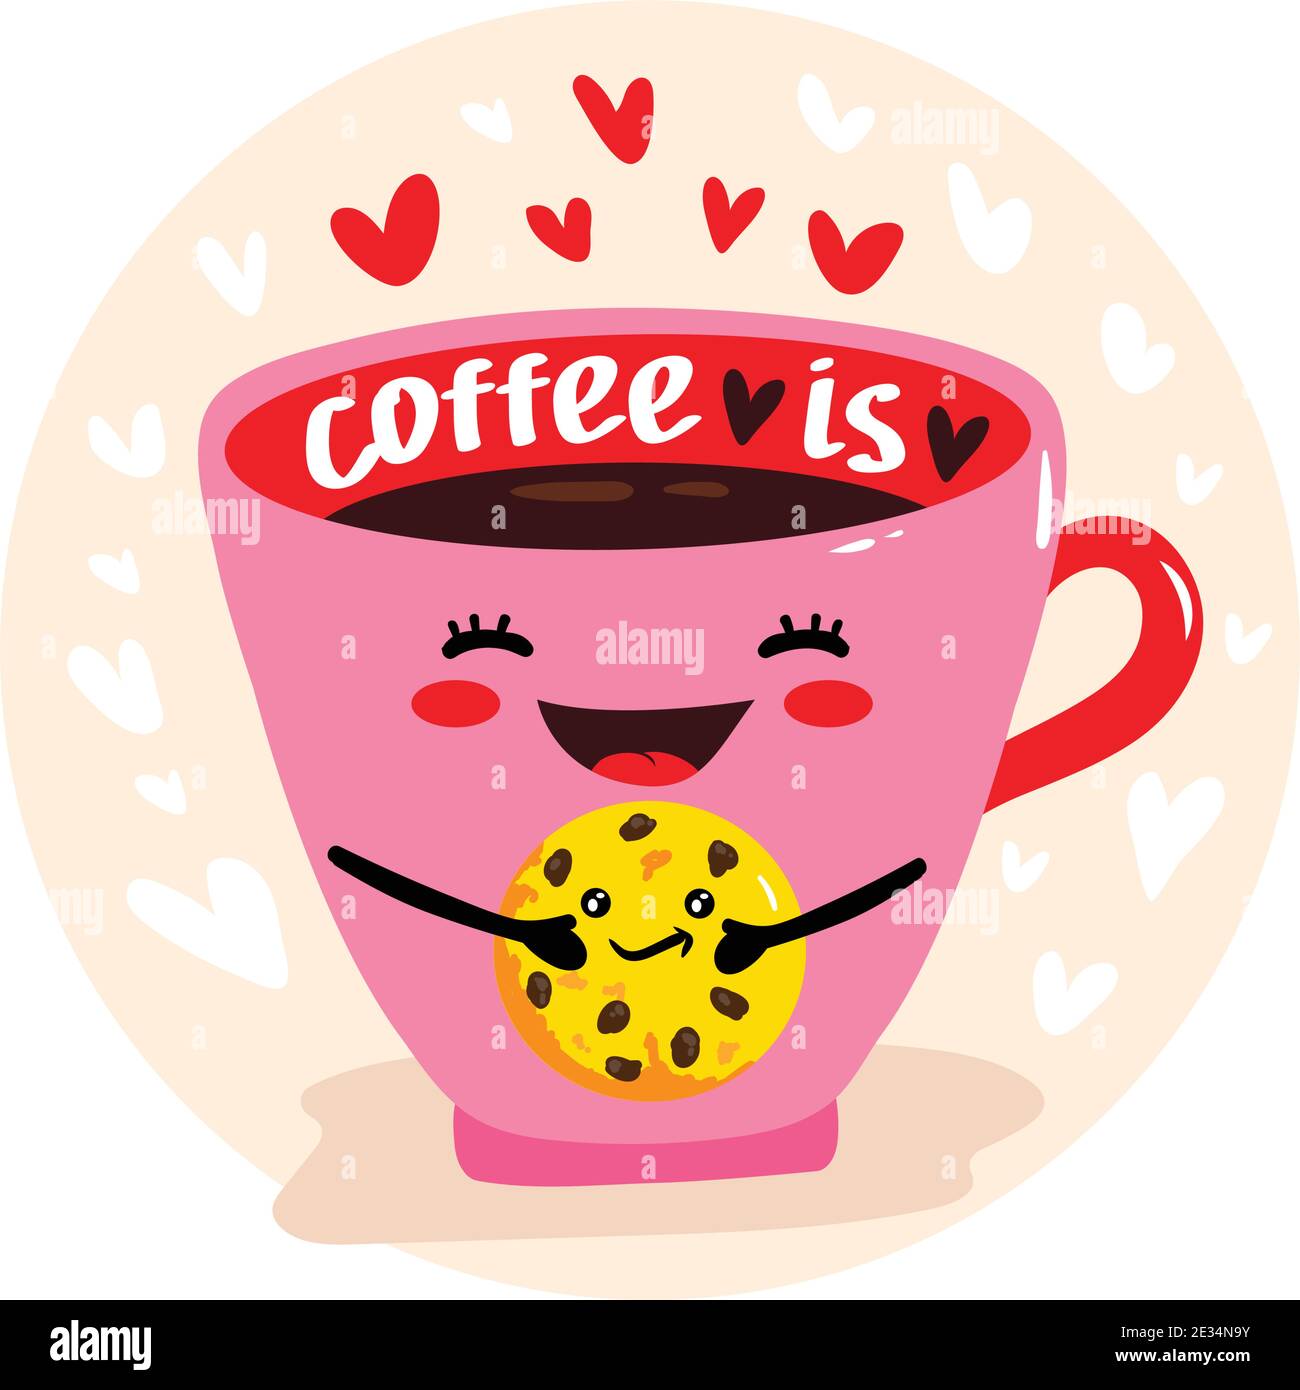 https://c8.alamy.com/comp/2E34N9Y/cute-vector-illustration-of-cup-of-coffee-holds-cookies-happy-kawaii-character-with-smiling-face-hearts-and-text-coffee-time-card-poster-print-2E34N9Y.jpg